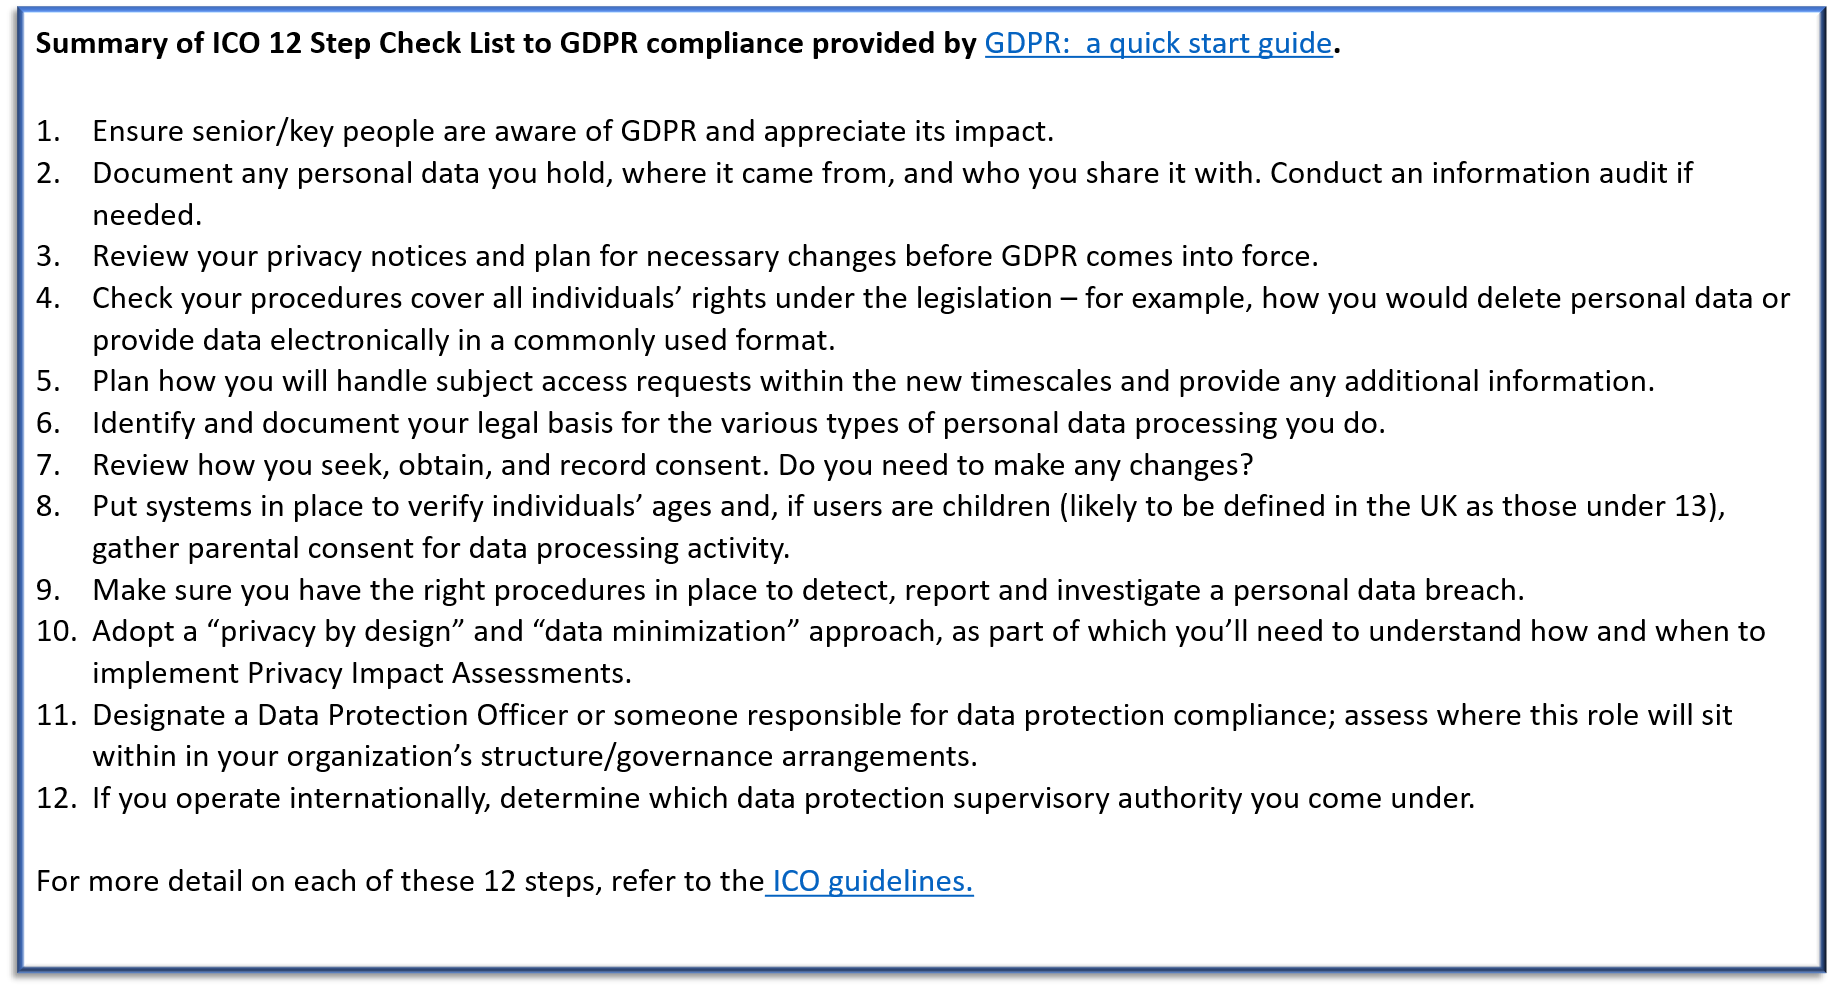 Summary of ICO 12 Step Check List to GDPR compliance provided by GDPR: a quick start guide. Ensure senior/key people are aware of GDPR and appreciate its impact. Document any personal data you hold, where it came from, and who you share it with. Conduct an information audit if needed. Review your privacy notices and plan for necessary changes before GDPR comes into force. Check your procedures cover all individuals’ rights under the legislation – for example, how you would delete personal data or provide data electronically in a commonly used format. Plan how you will handle subject access requests within the new timescales and provide any additional information. Identify and document your legal basis for the various types of personal data processing you do. Review how you seek, obtain, and record consent. Do you need to make any changes? Put systems in place to verify individuals’ ages and, if users are children (likely to be defined in the UK as those under 13), gather parental consent for data processing activity. Make sure you have the right procedures in place to detect, report and investigate a personal data breach. Adopt a “privacy by design” and “data minimization” approach, as part of which you’ll need to understand how and when to implement Privacy Impact Assessments. Designate a Data Protection Officer or someone responsible for data protection compliance; assess where this role will sit within in your organization’s structure/governance arrangements. If you operate internationally, determine which data protection supervisory authority you come under. For more detail on each of these 12 steps, refer to the ICO guidelines.  